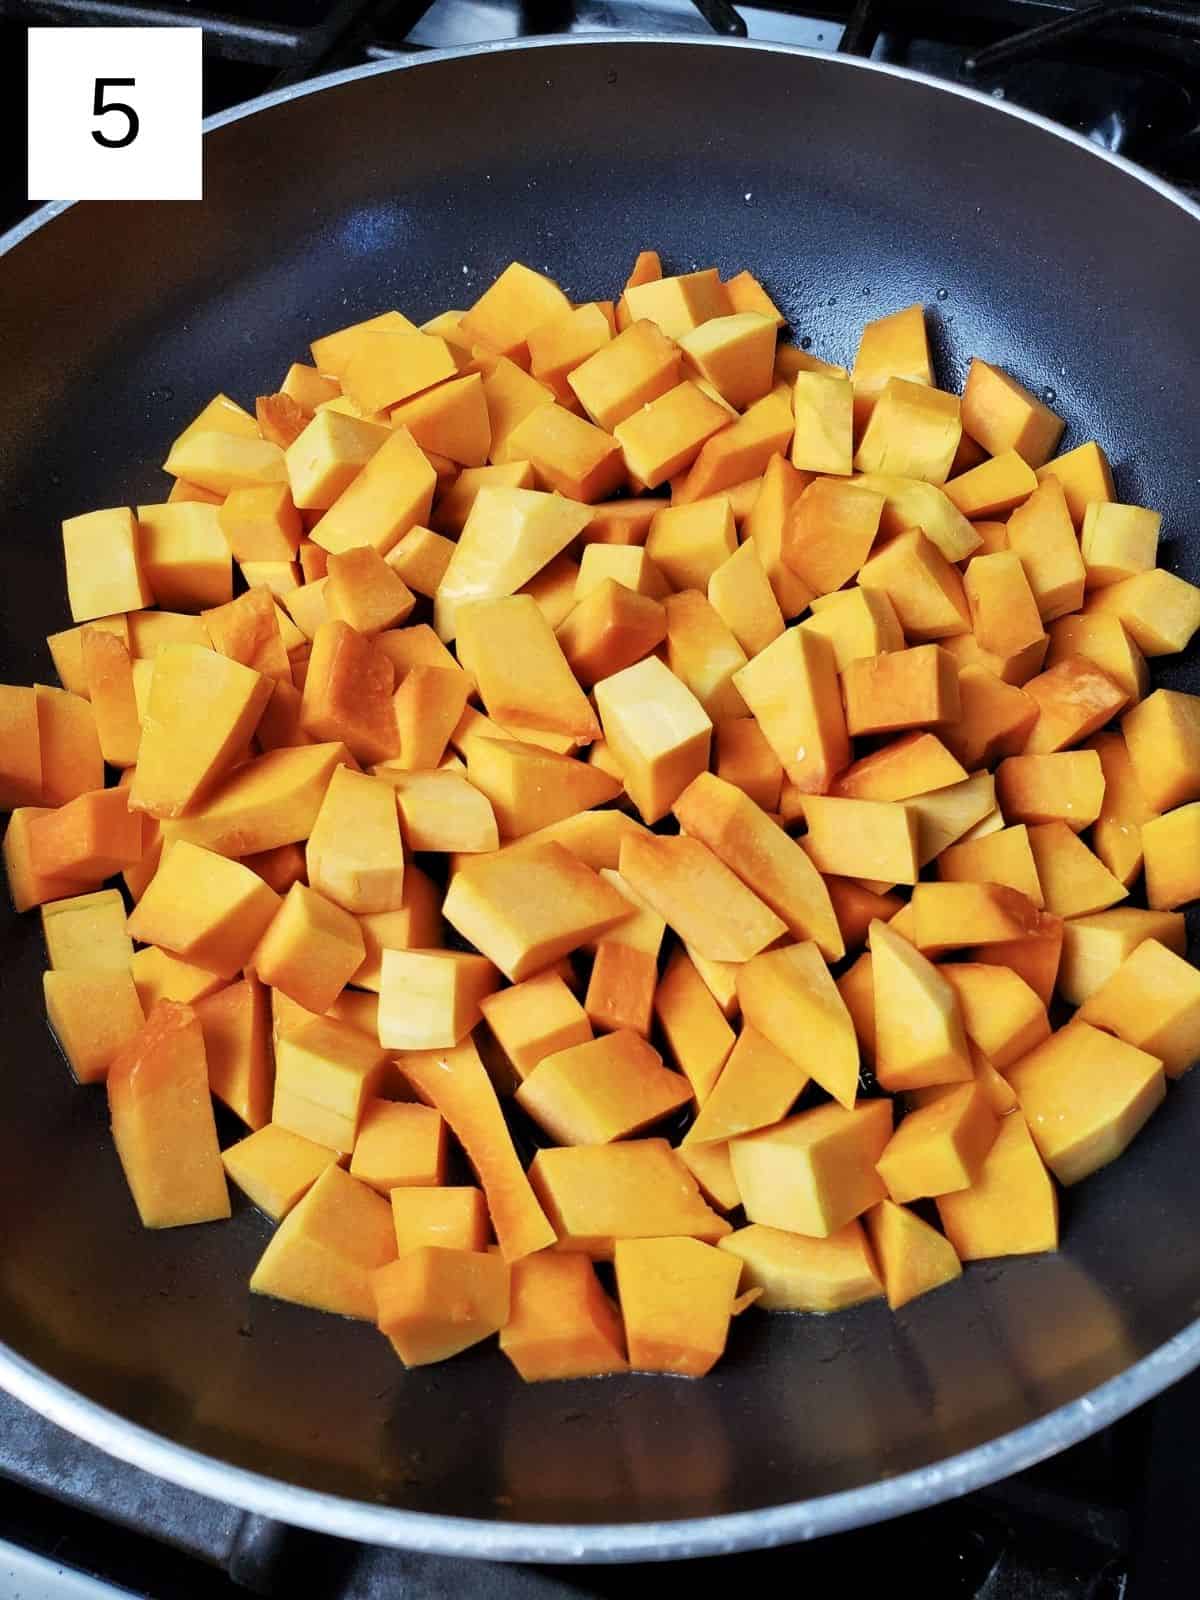 butternut squash cubes on a heated oil-coated pan.